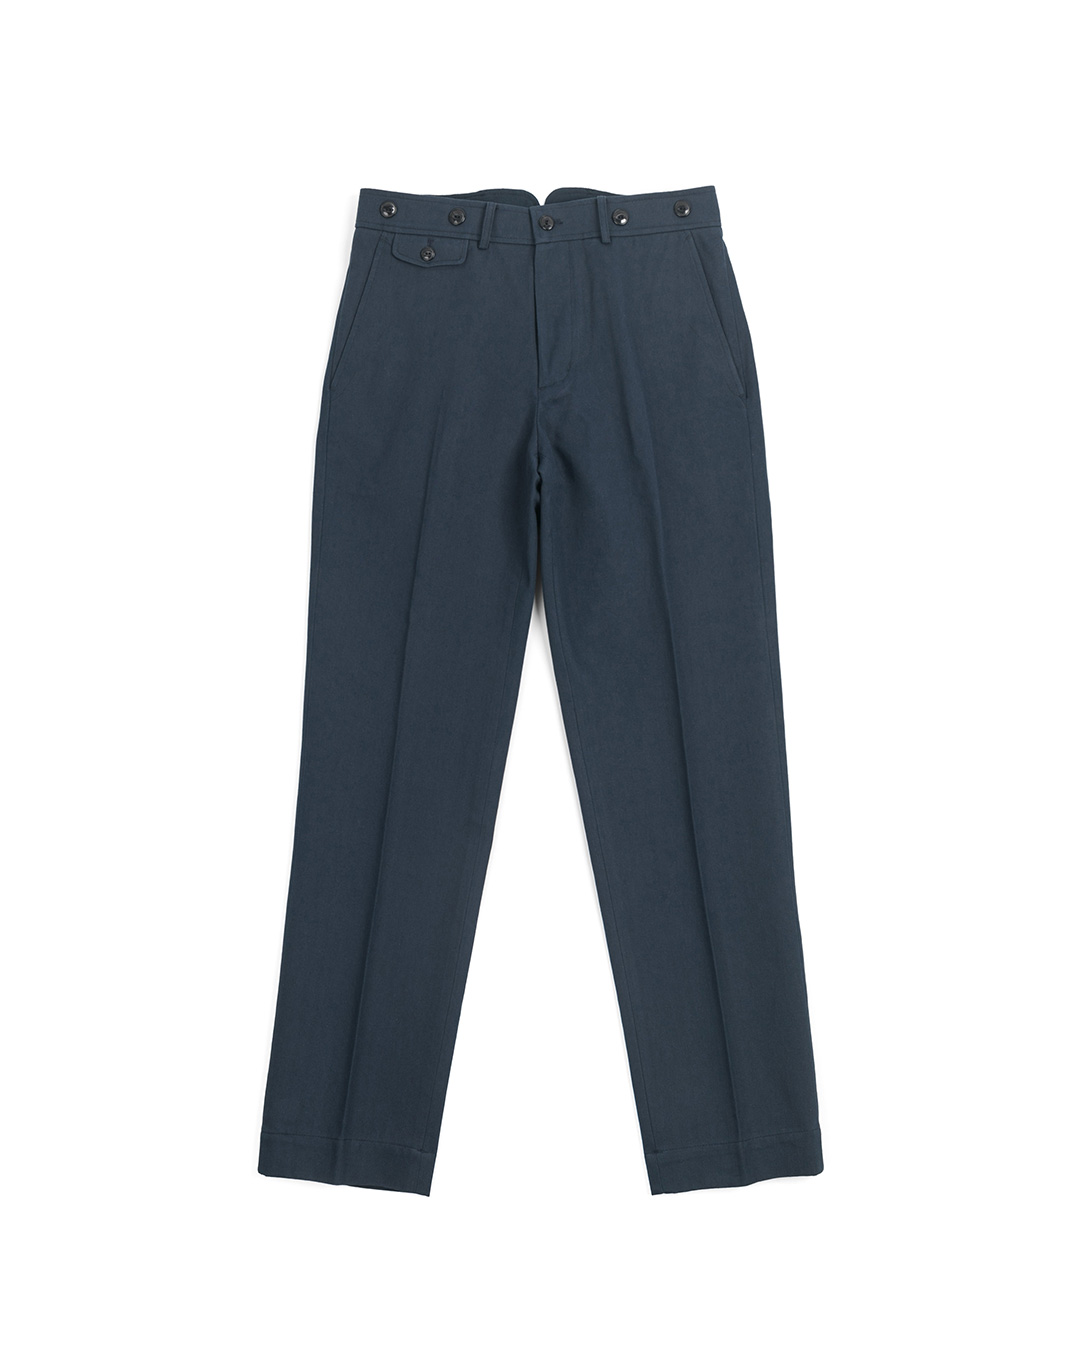 03 BUCKLE-BACK WORK TROUSERS (navy)